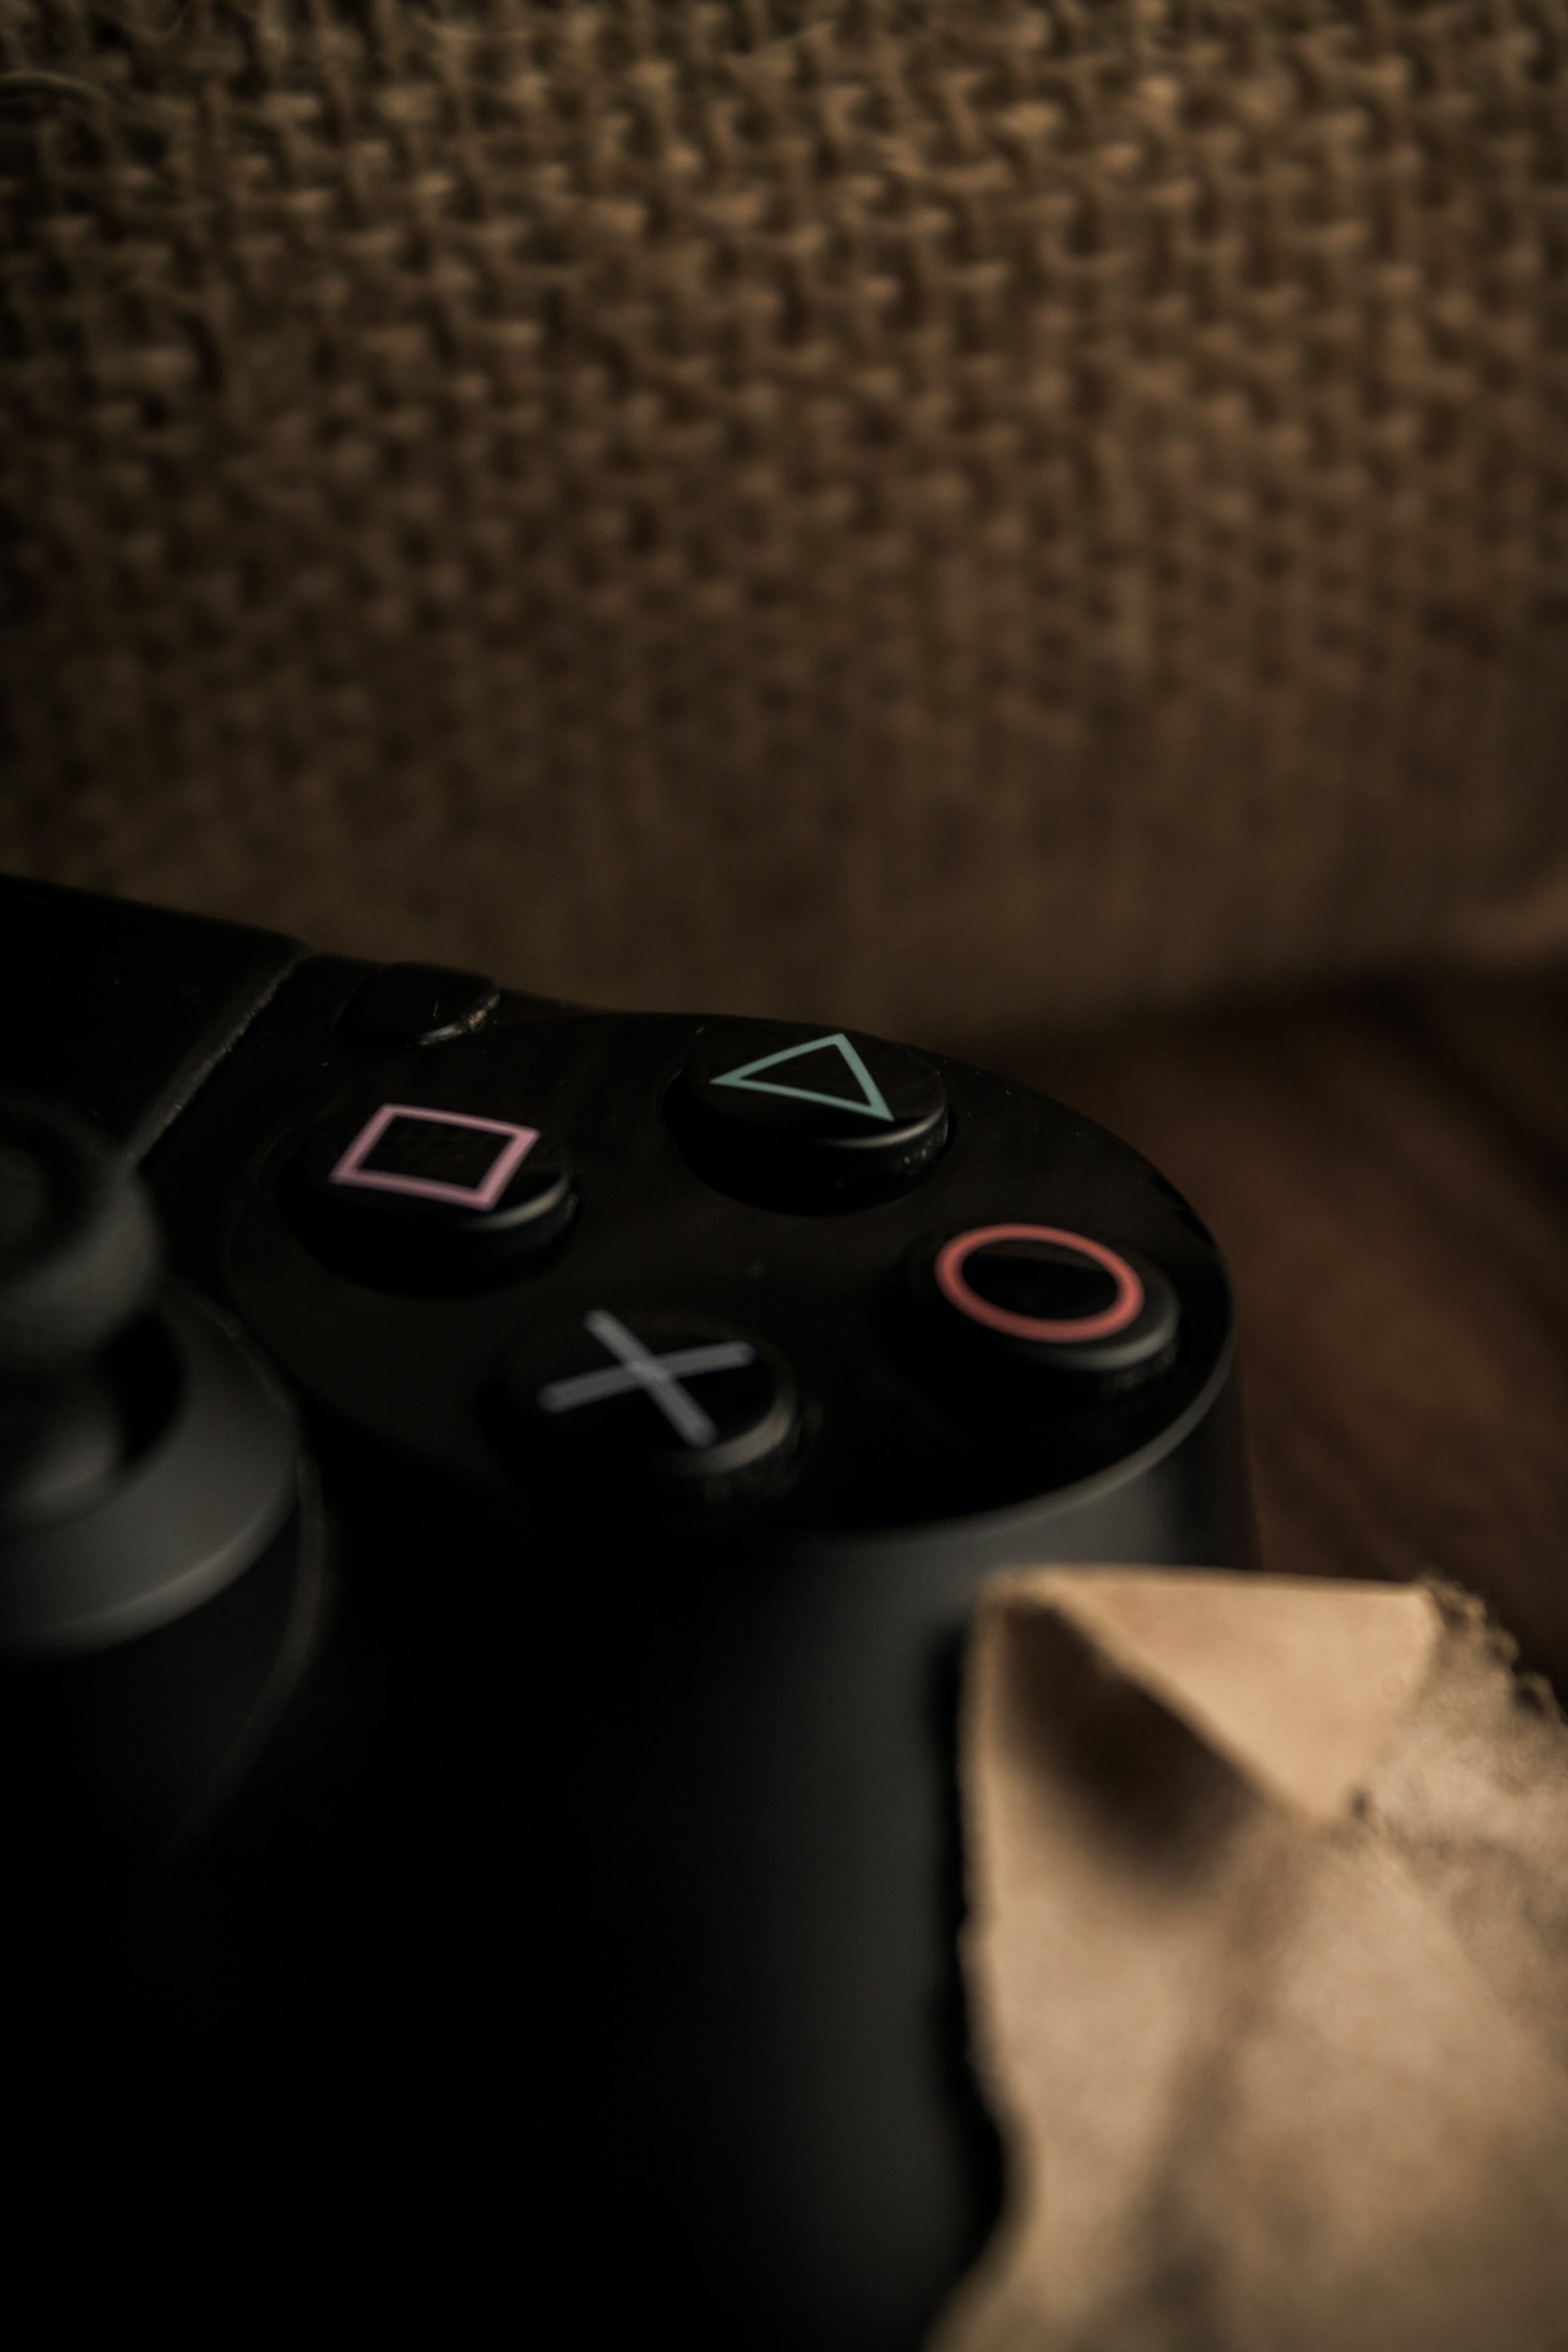 A gaming console | Source: Pexels